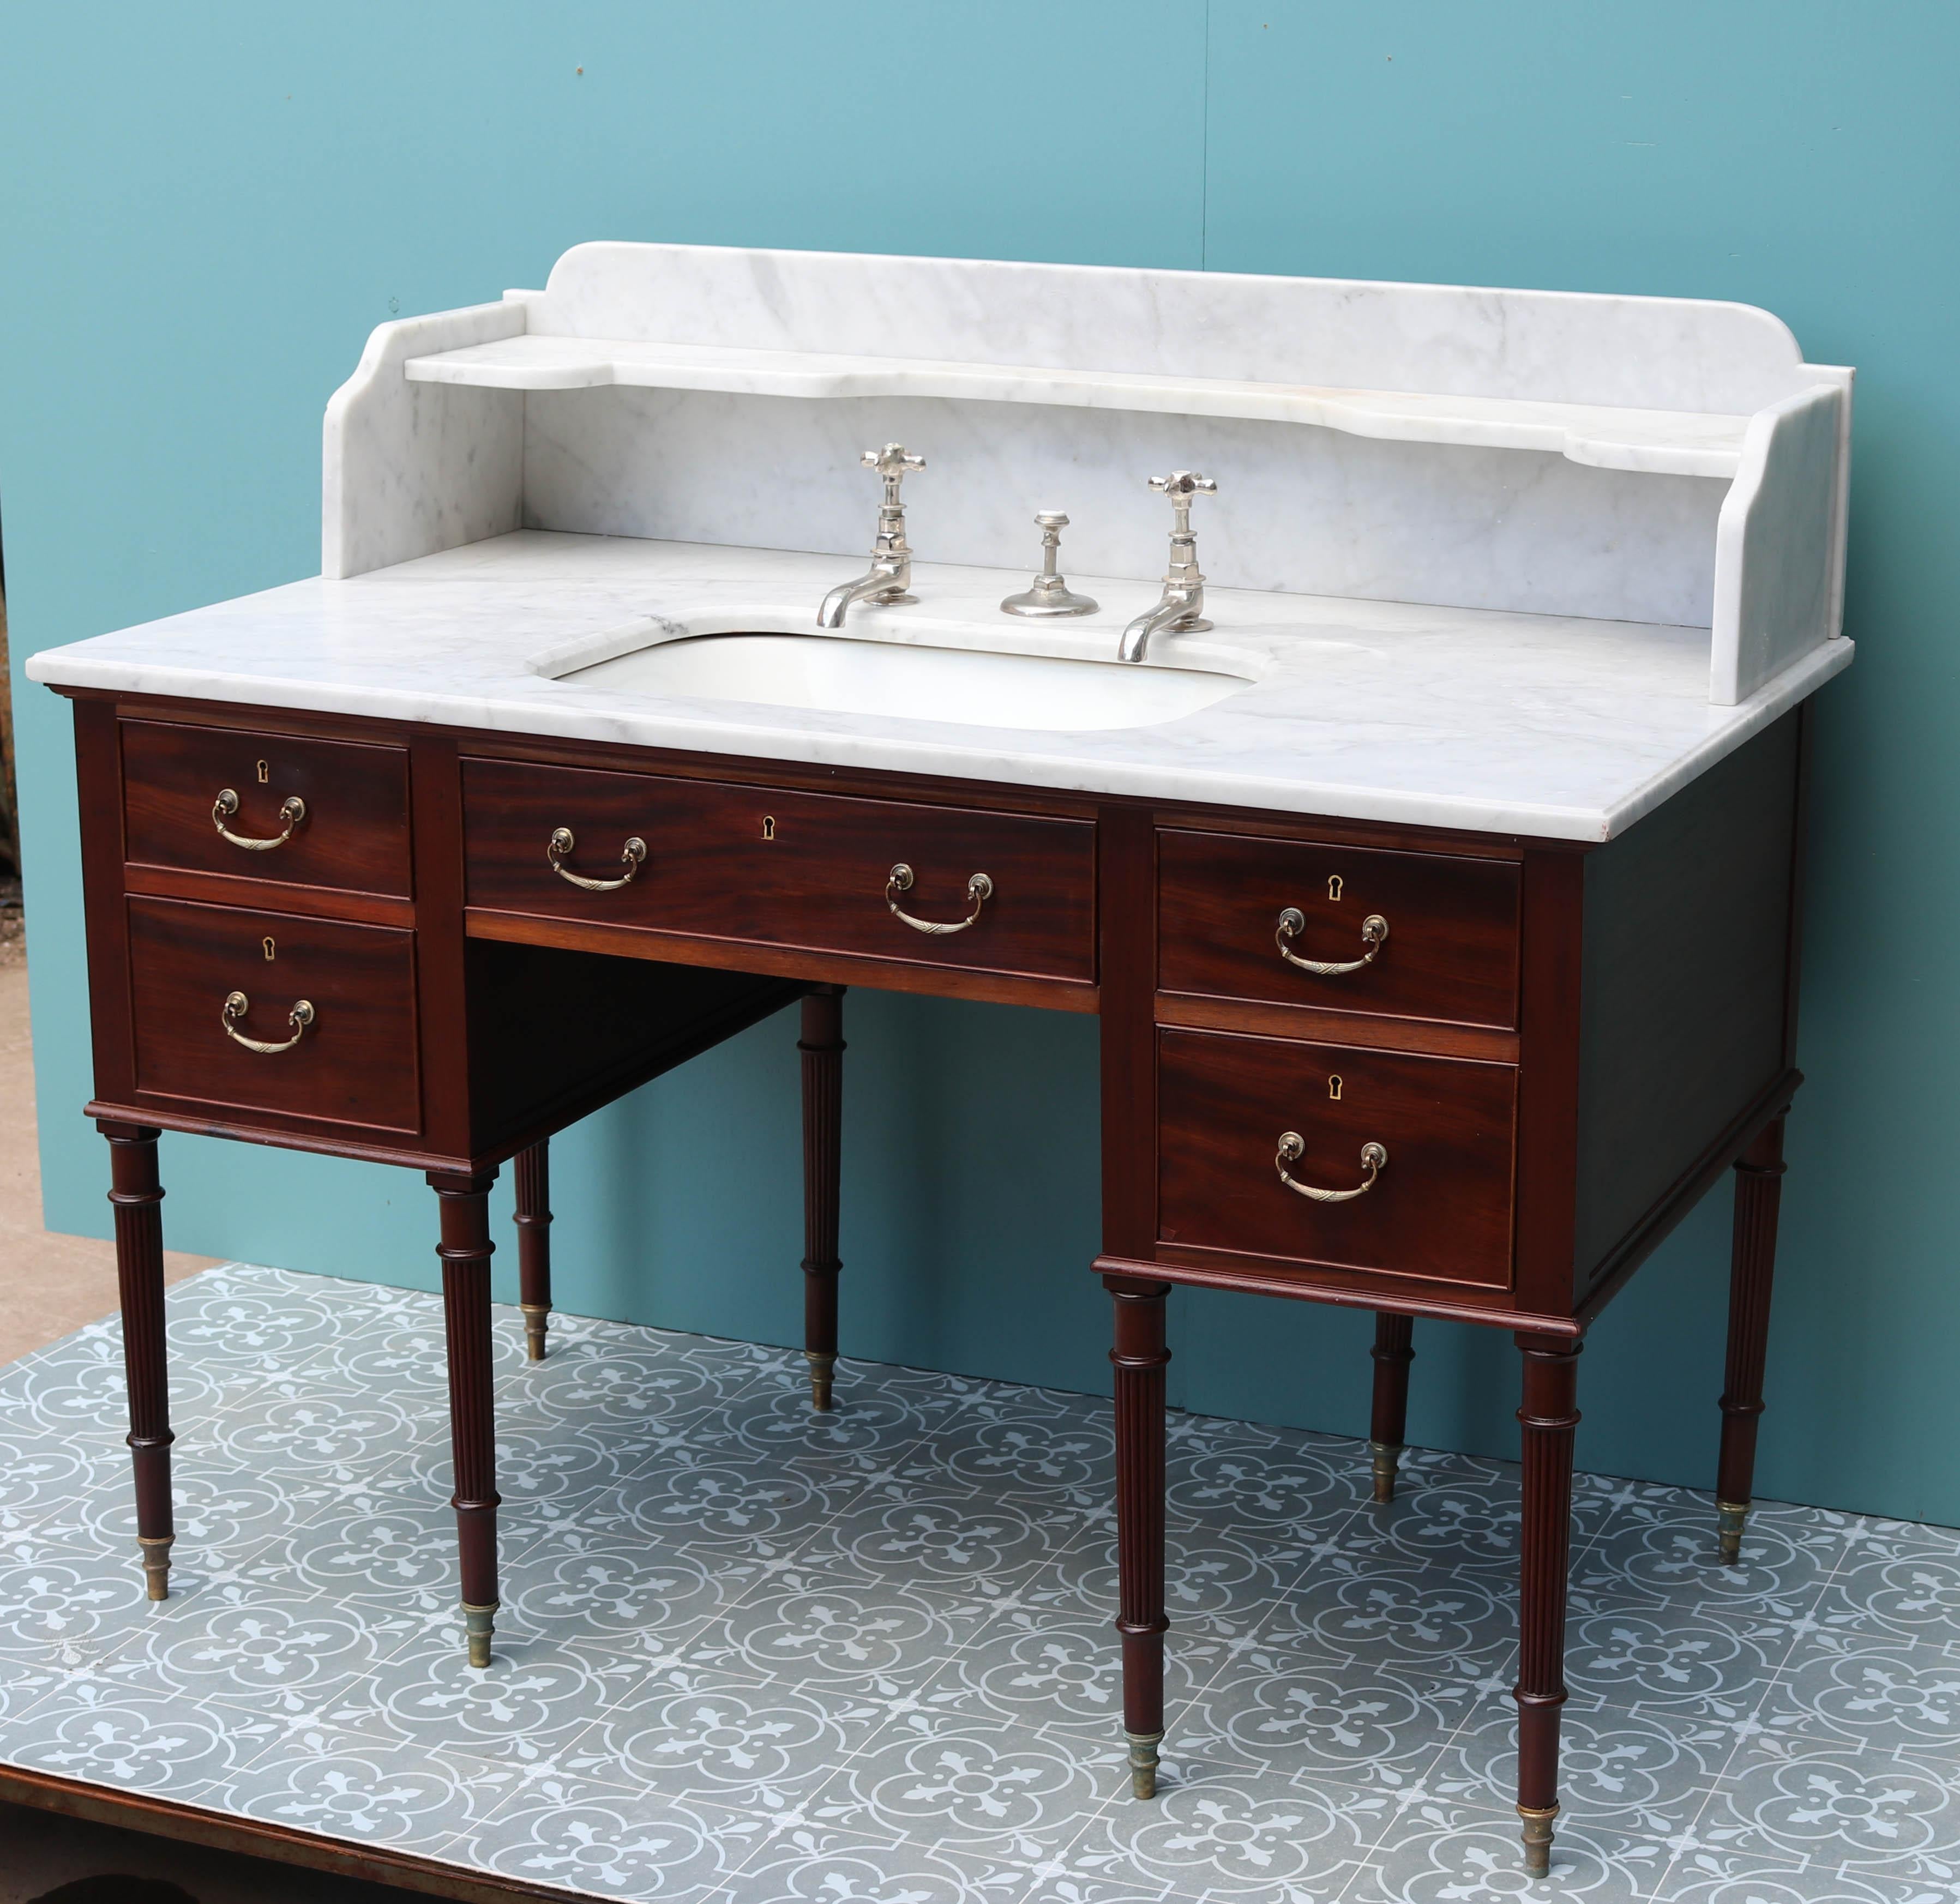 About

A very rare Scottish wash basin with under-mounted porcelain plunger basin and nickel-plated taps. Italian Carrara marble surface and splash-back. Mahogany veneered base standing on eight turned legs.

Individually these wash stands are